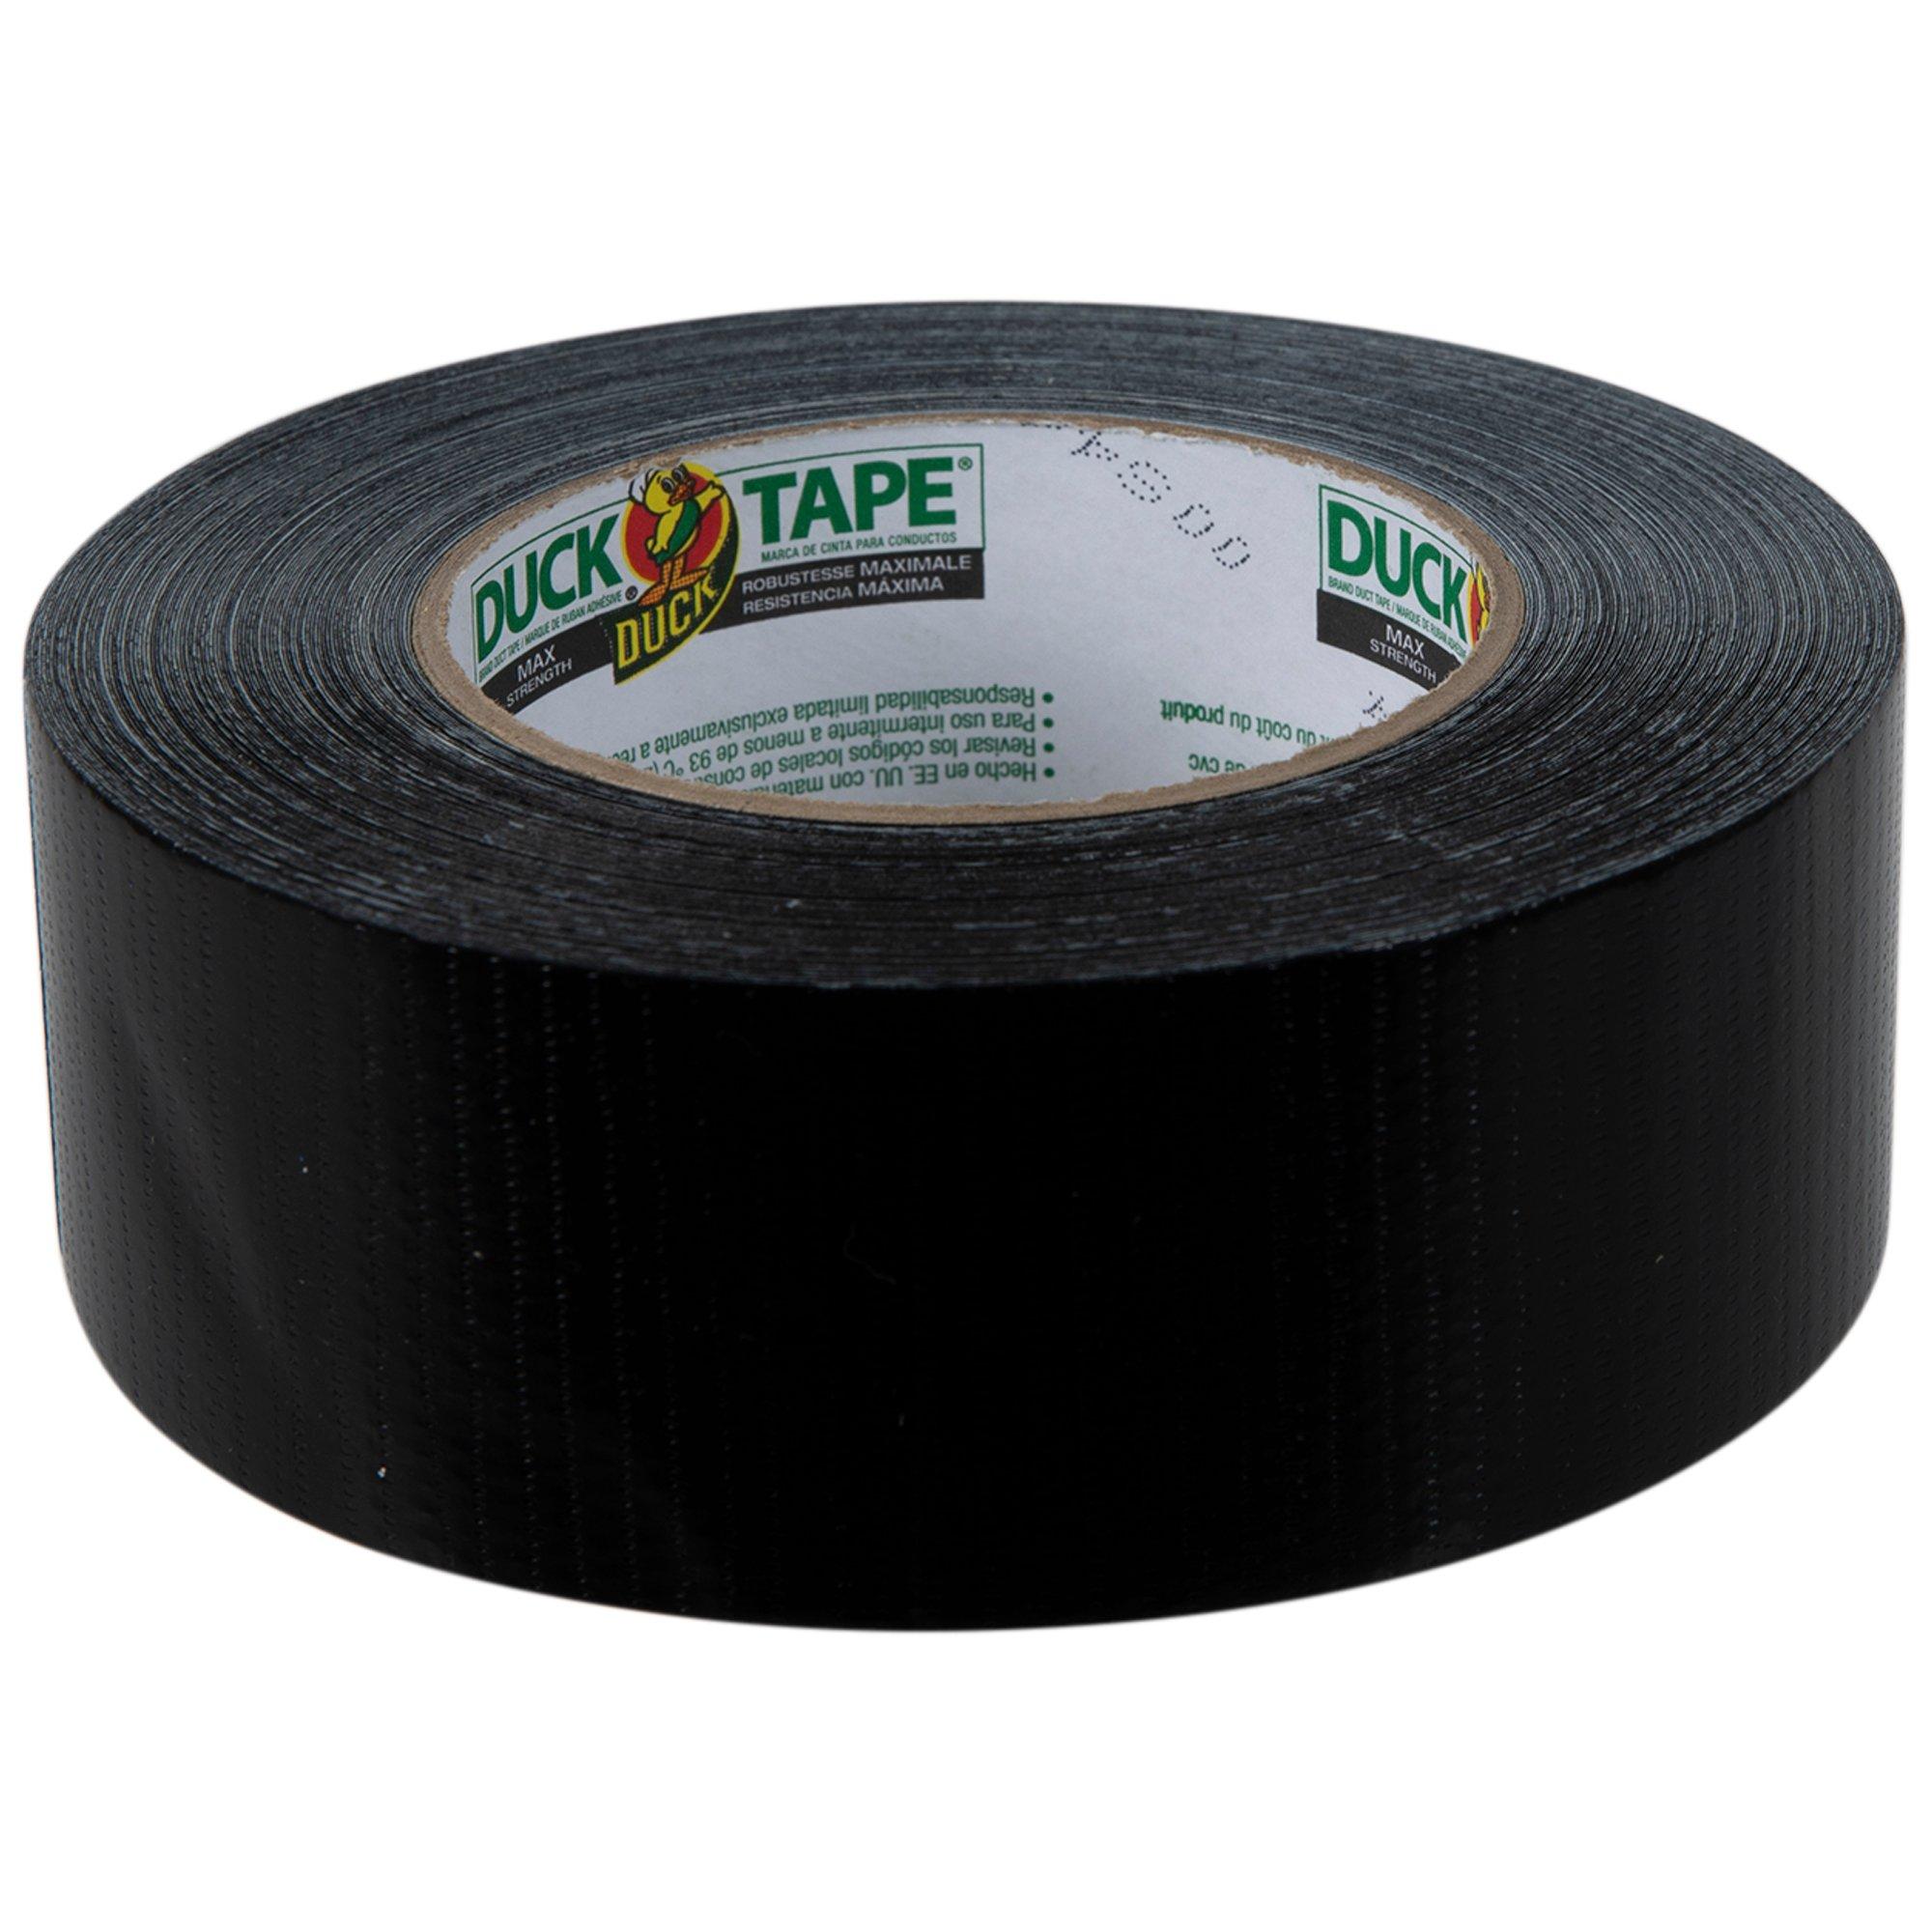 All-Purpose Strength Duct Tape, Duck Brand